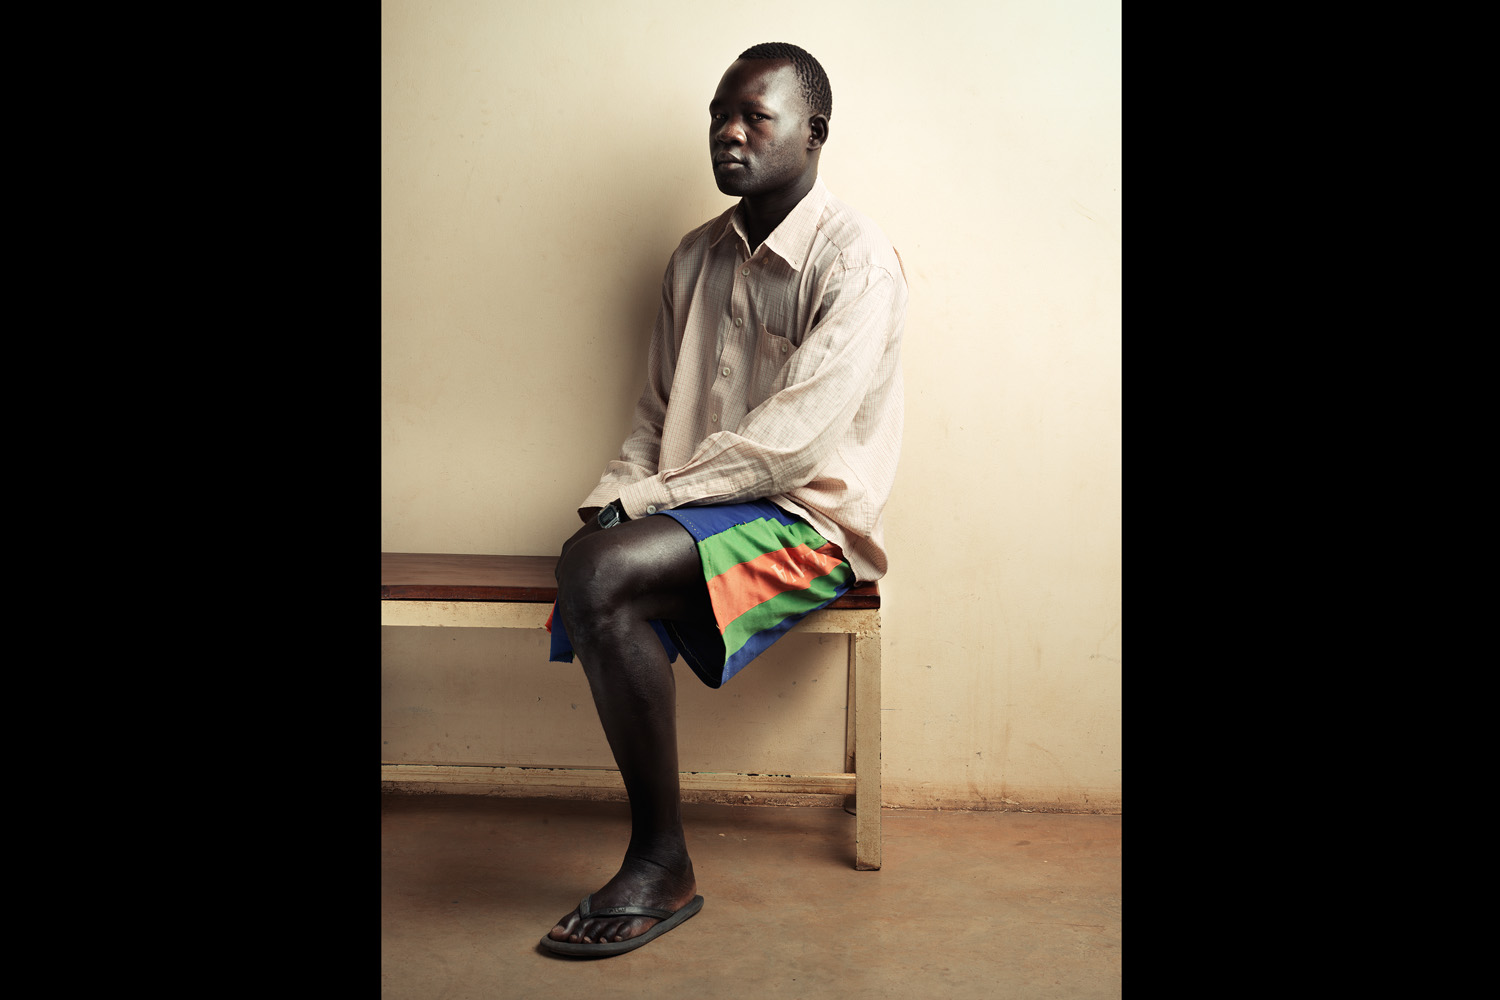 International Mine Action Day: Portraits of Survivors by Marco Grob